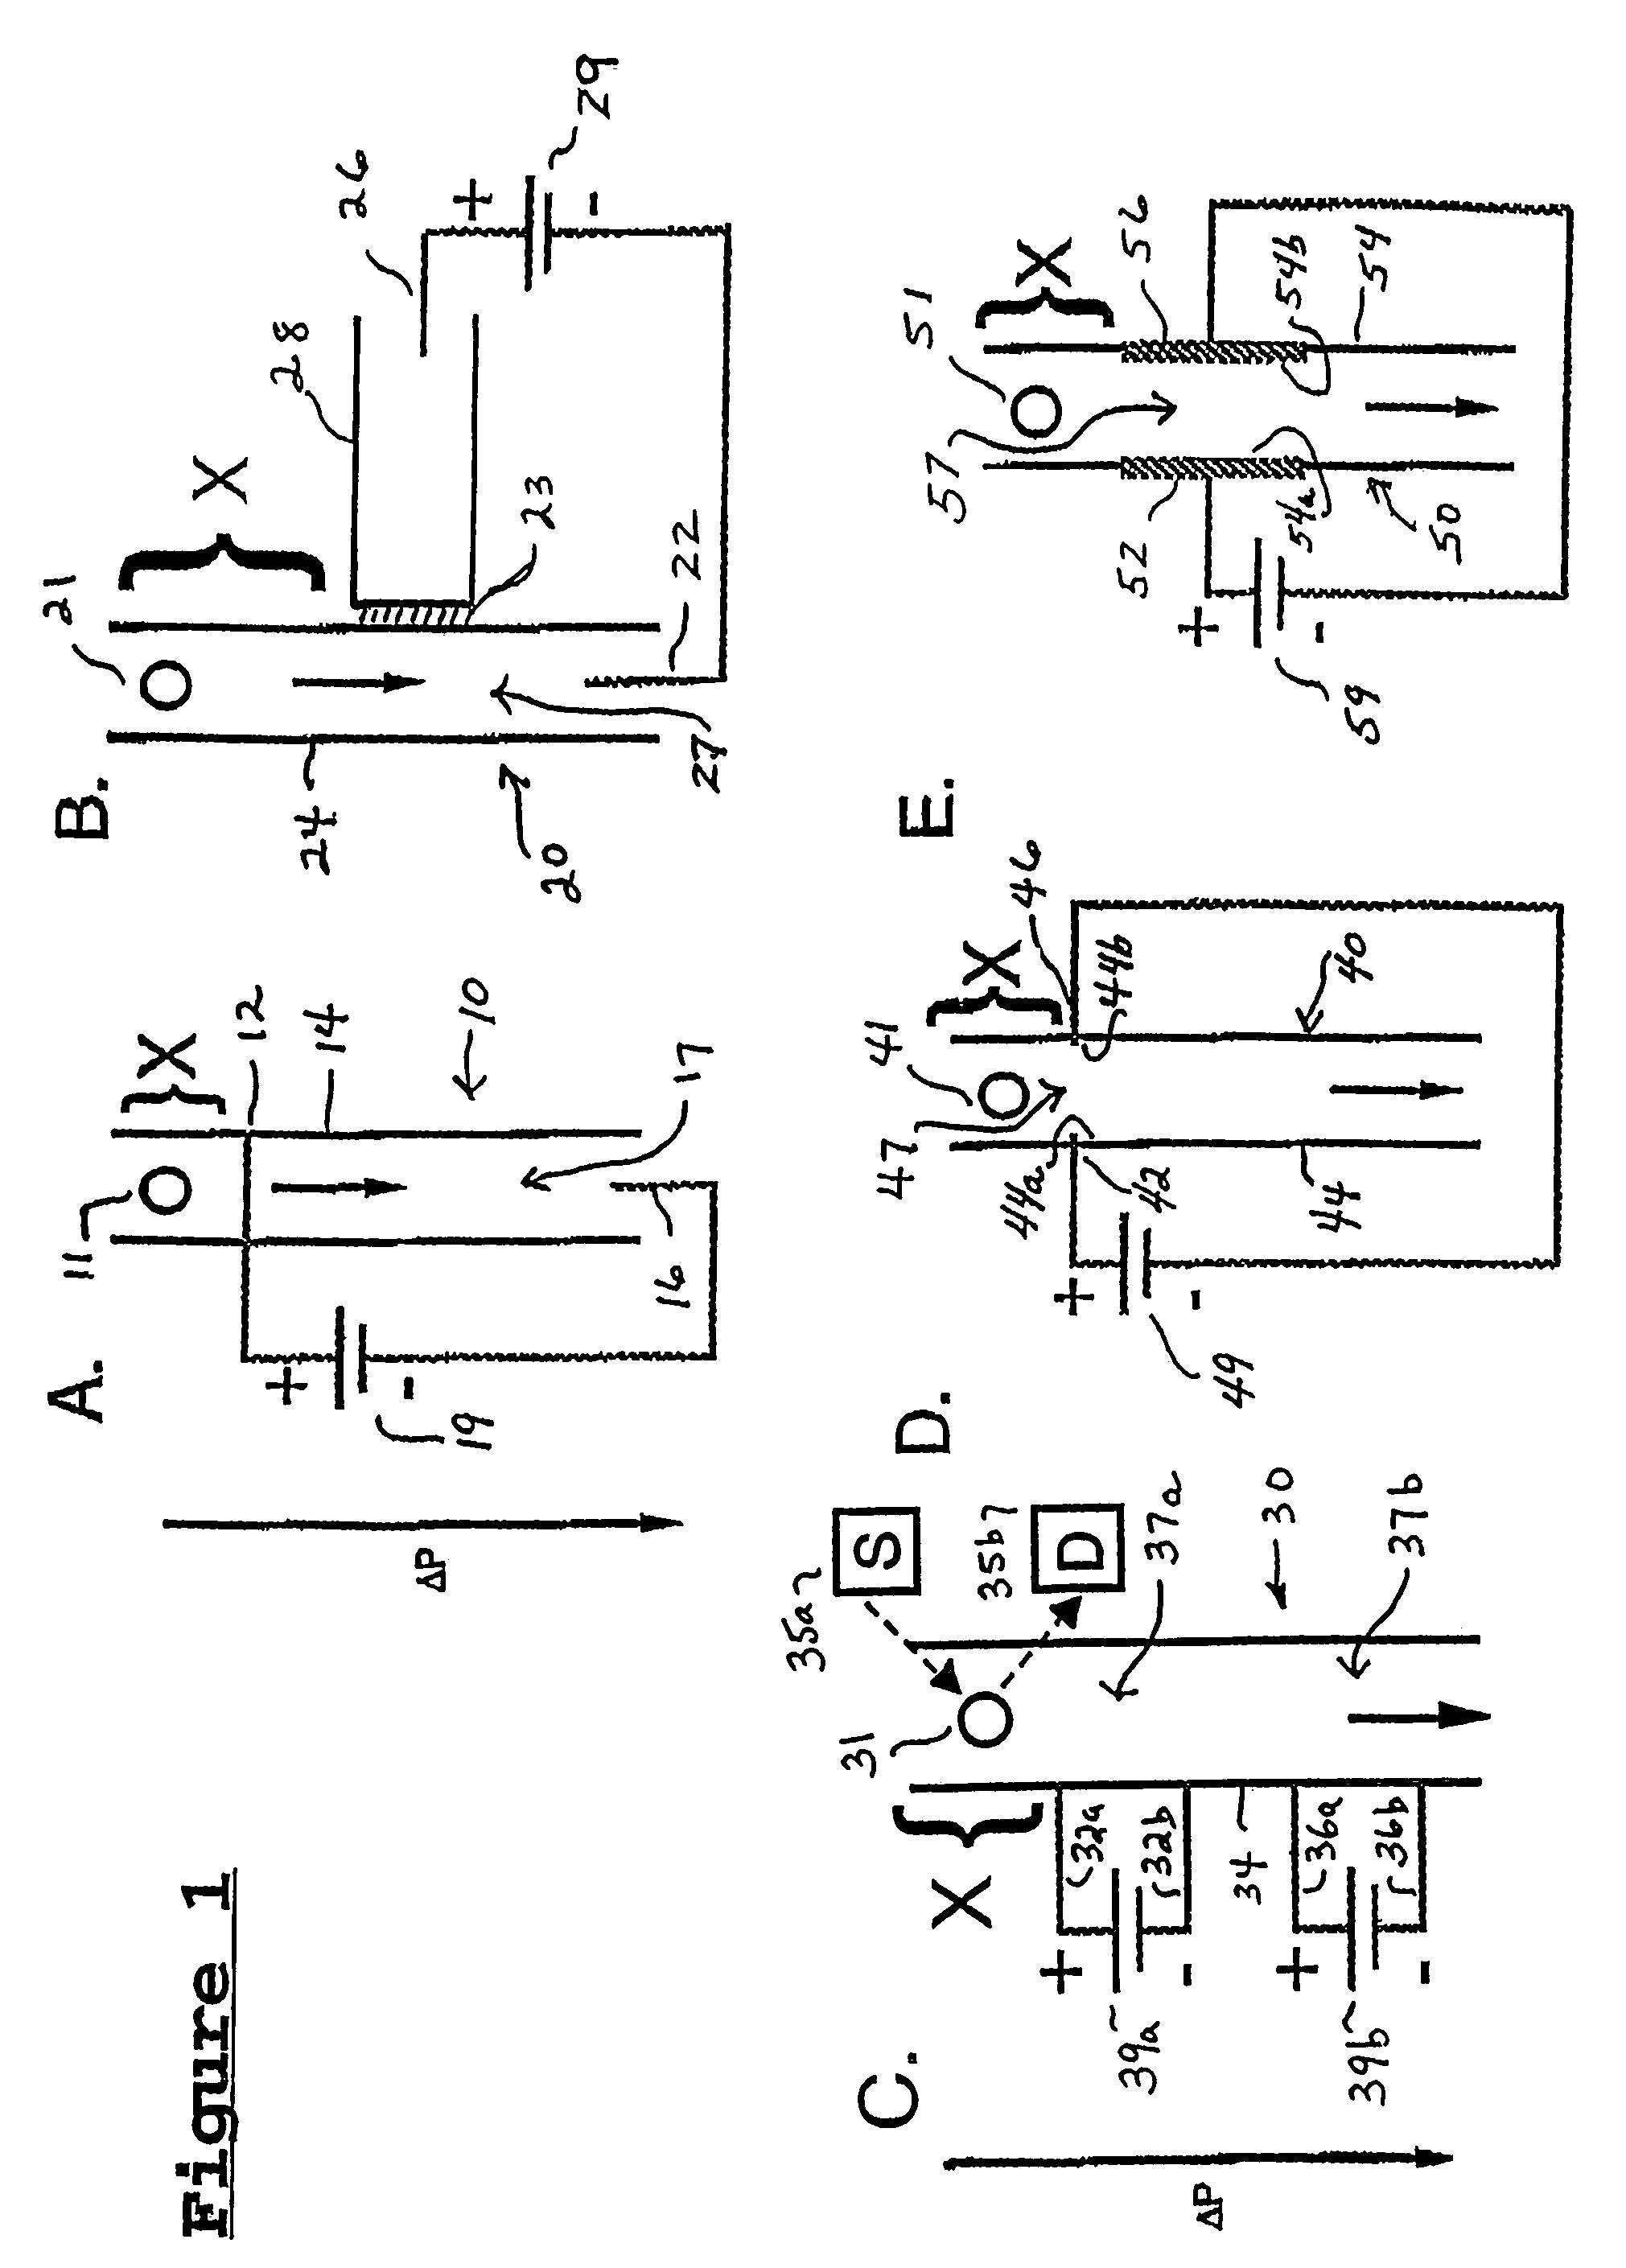 Microfluidic systems and methods for transport and lysis of cells and analysis of cell lysate